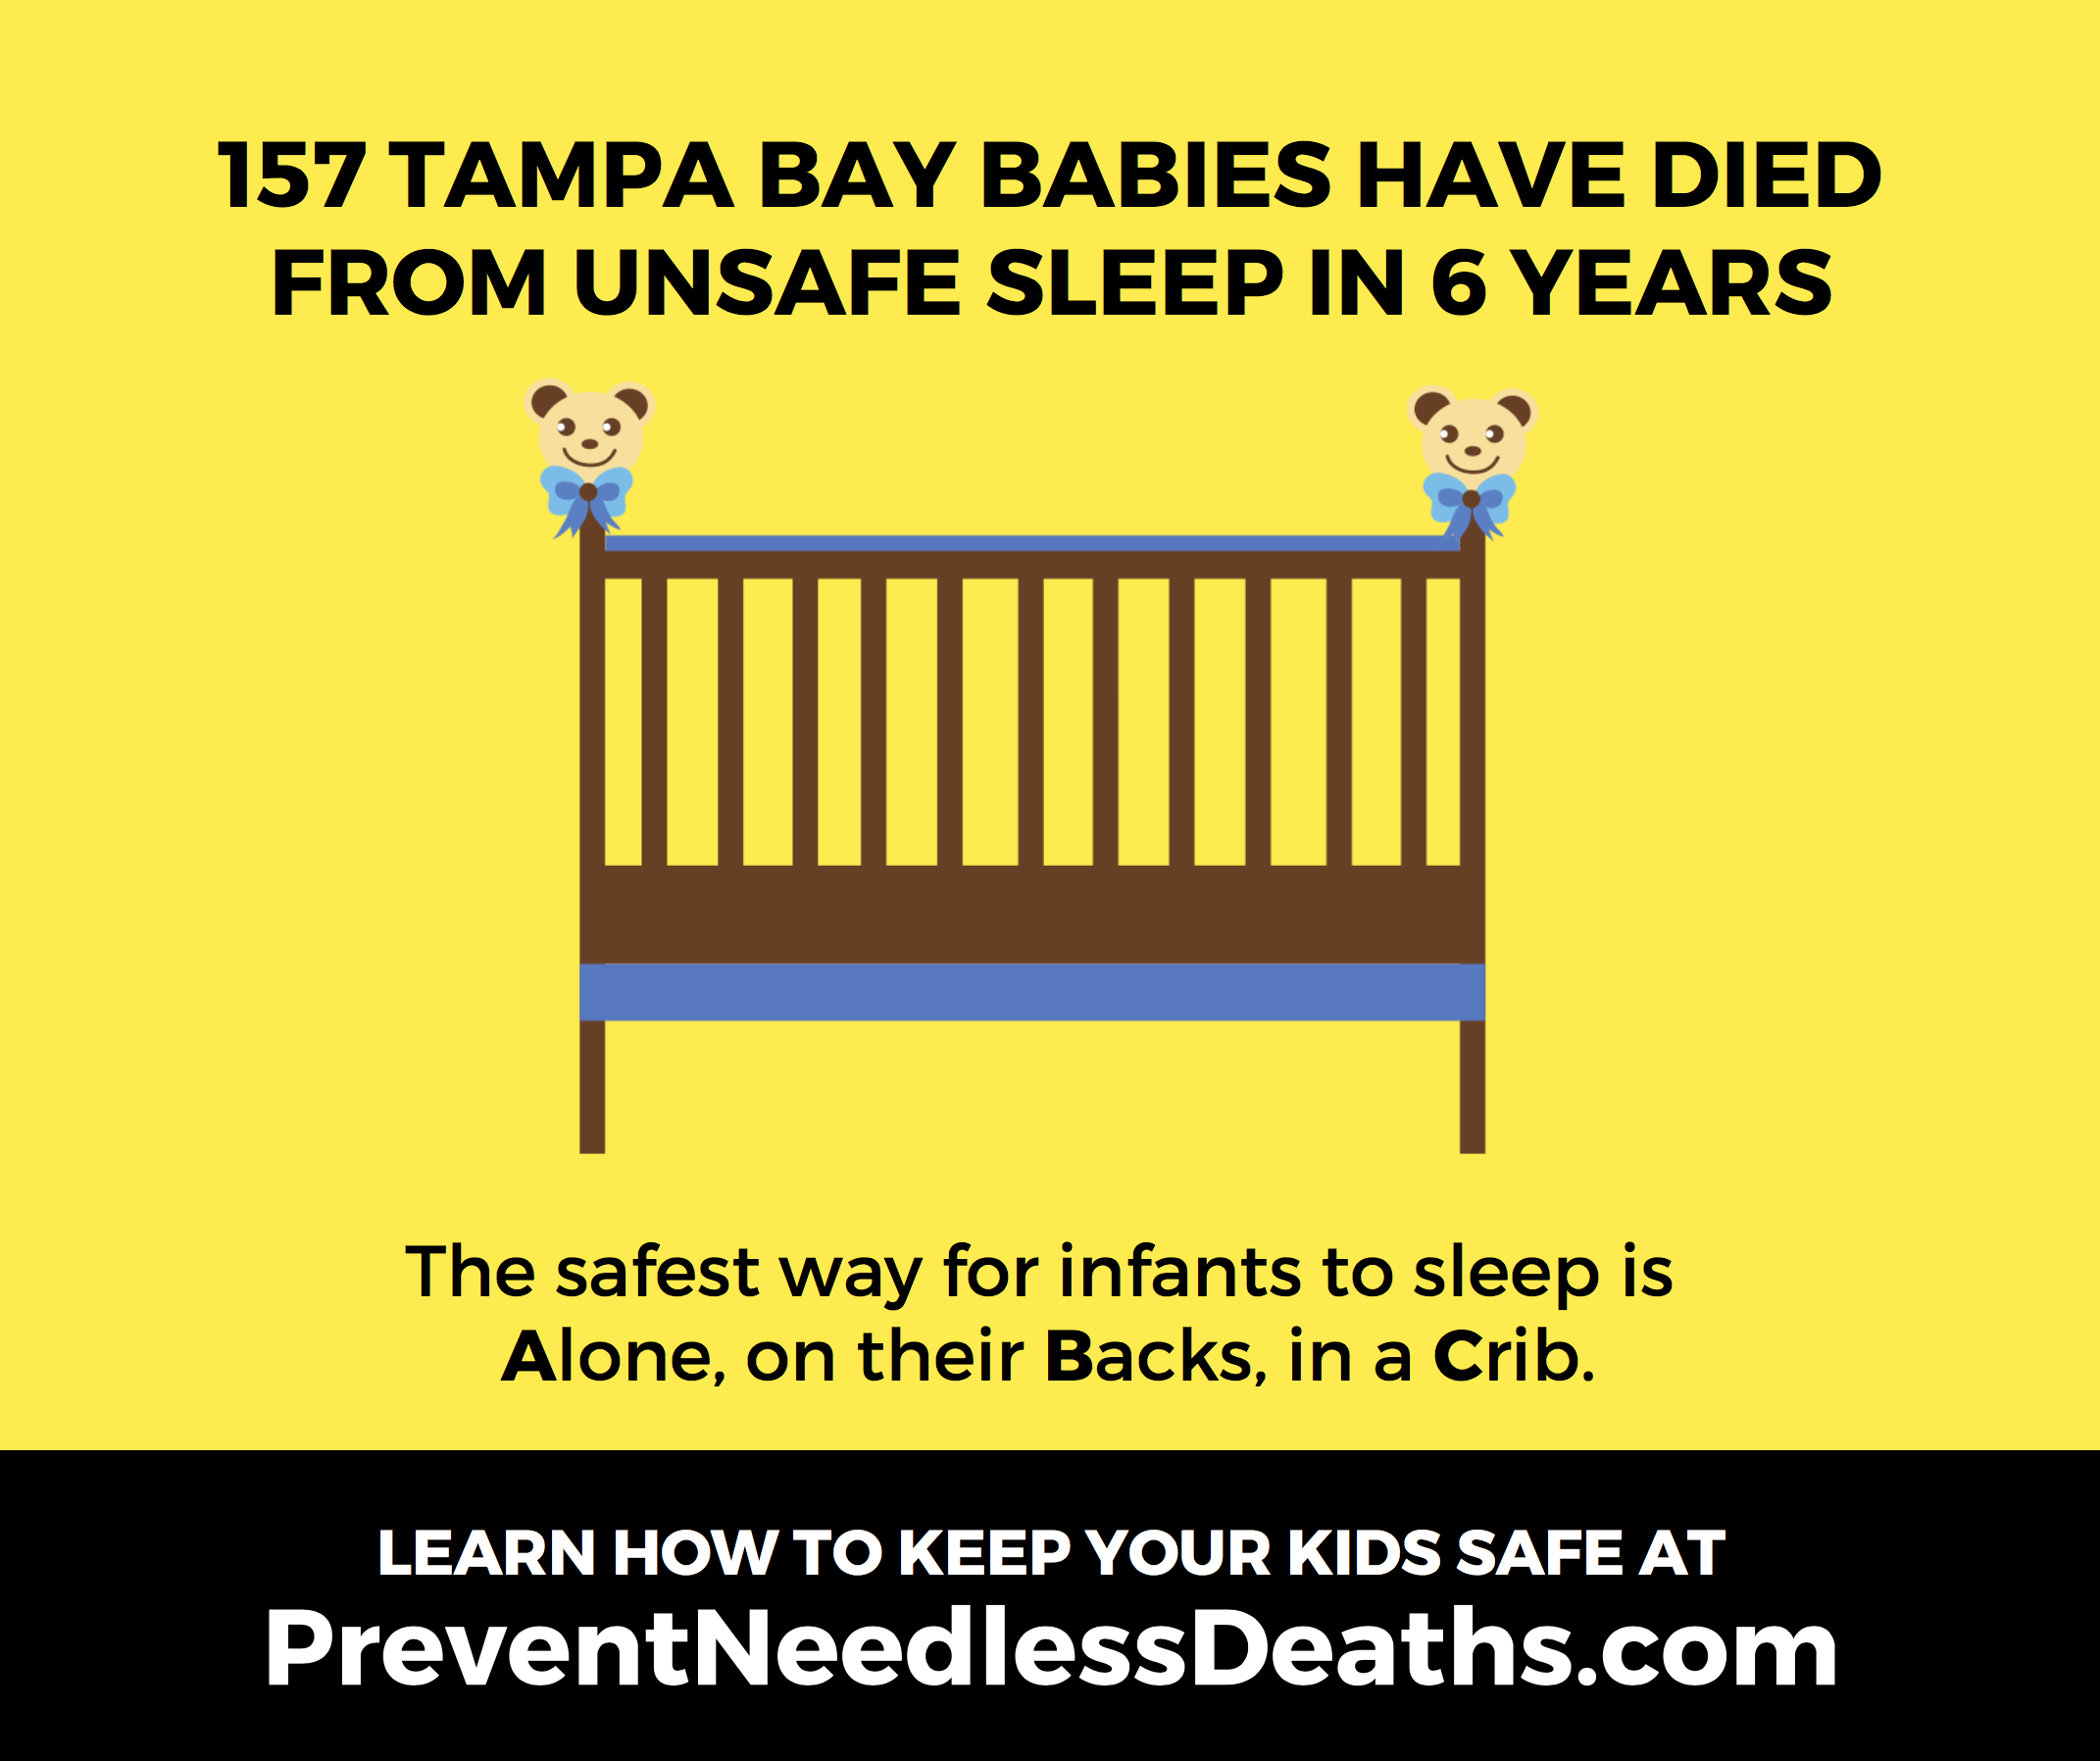 157 tampa bay babies died from unsafe sleep in 6 years